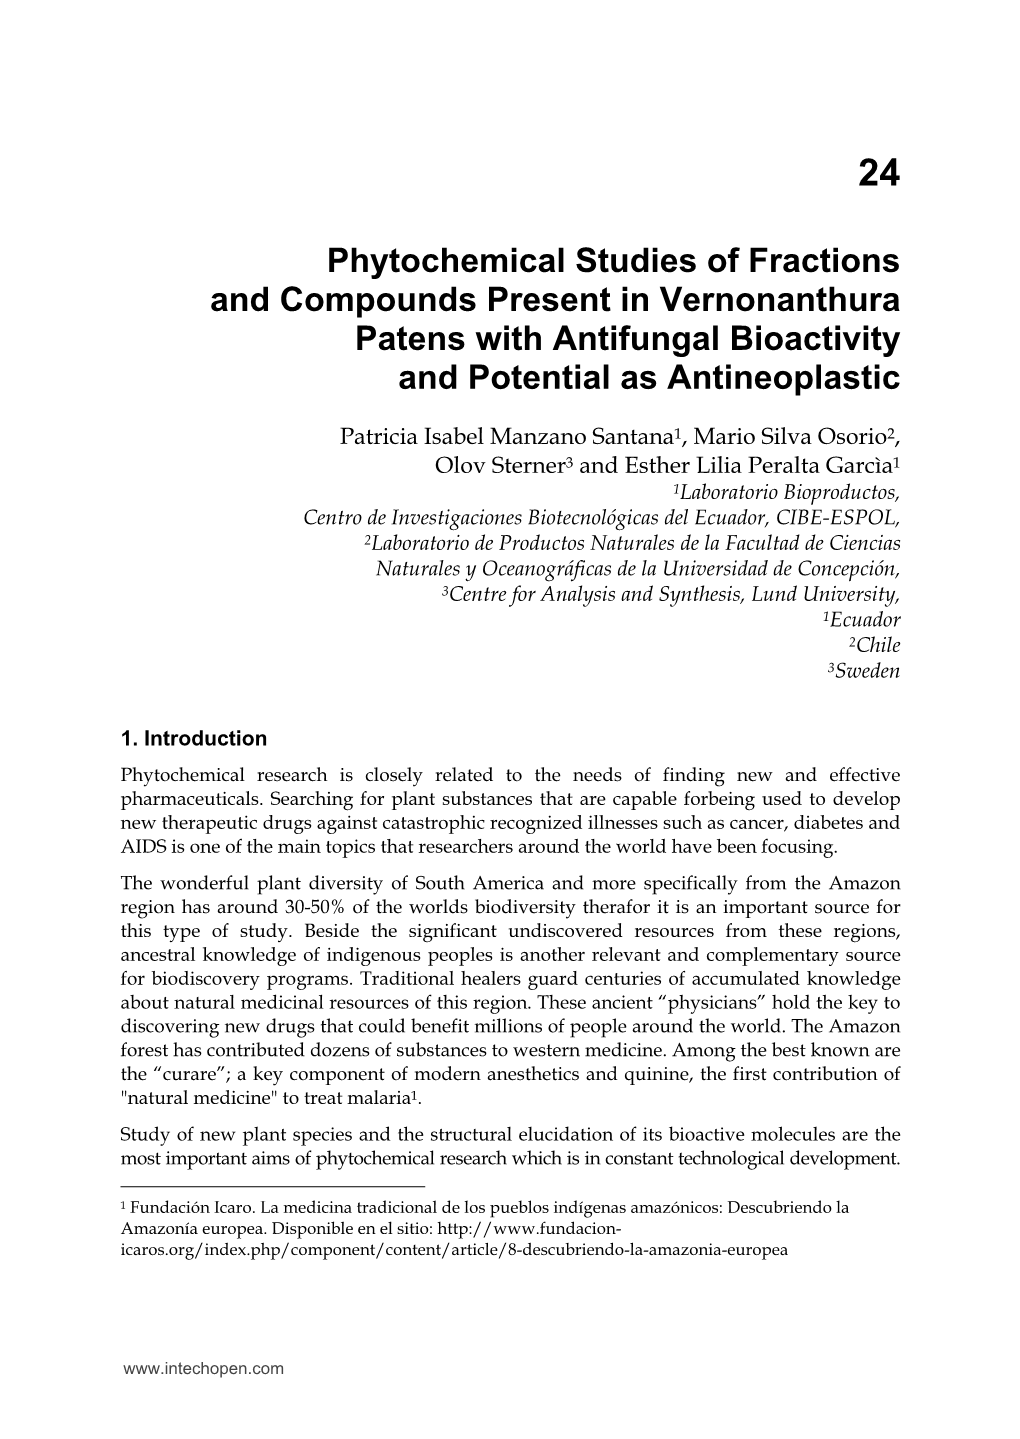 Phytochemical Studies of Fractions and Compounds Present in Vernonanthura Patens with Antifungal Bioactivity and Potential As Antineoplastic